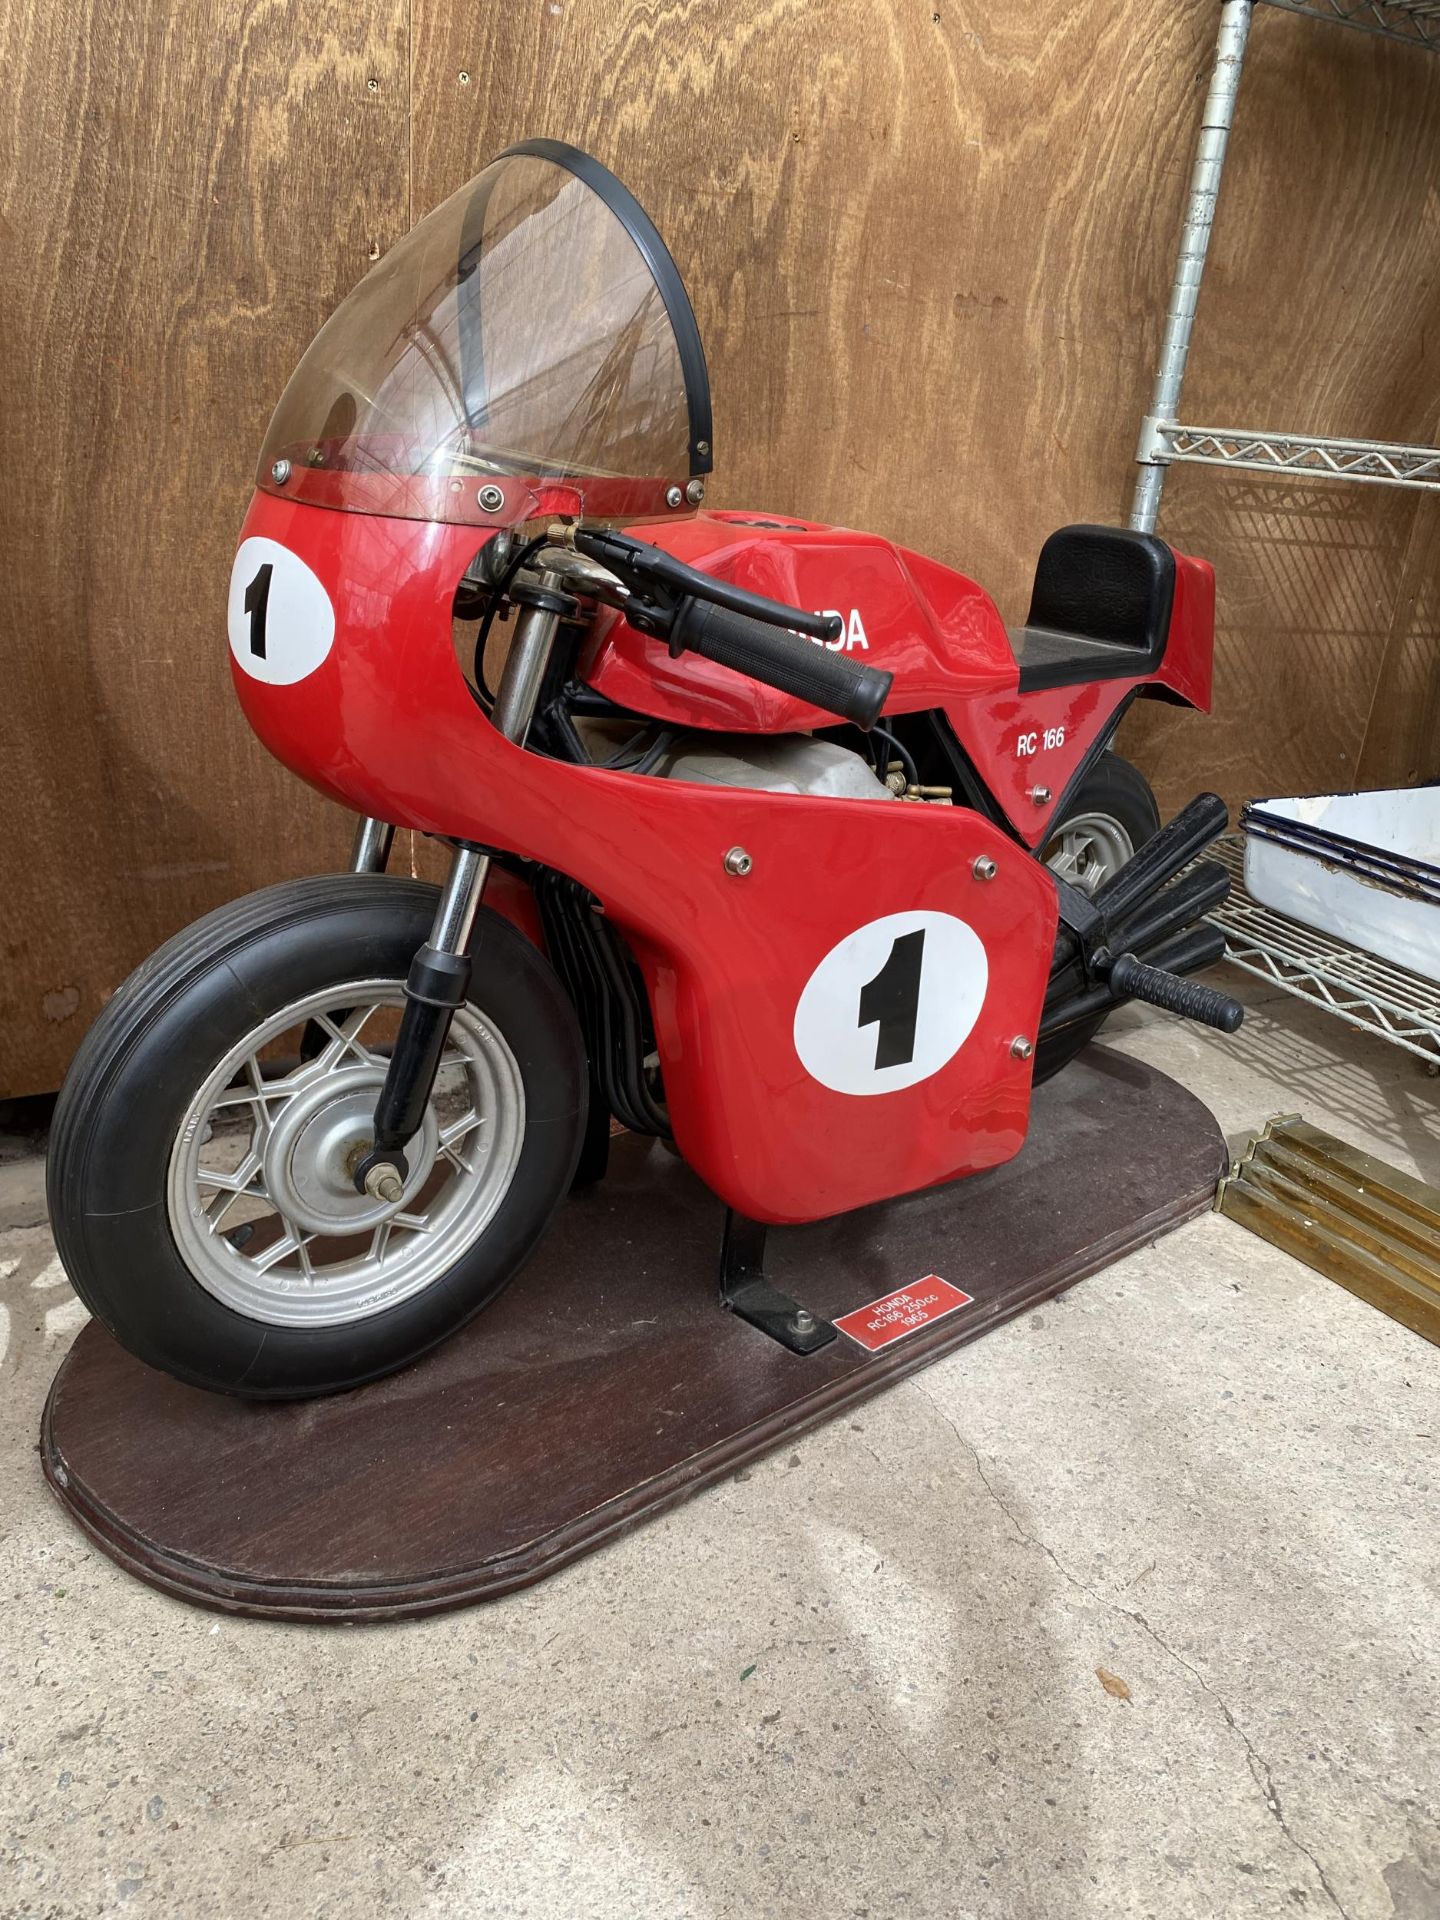 A HONDA RC166 MODEL FAIRGROUND RIDE MOUNTED ON A WOODEN PLINTH